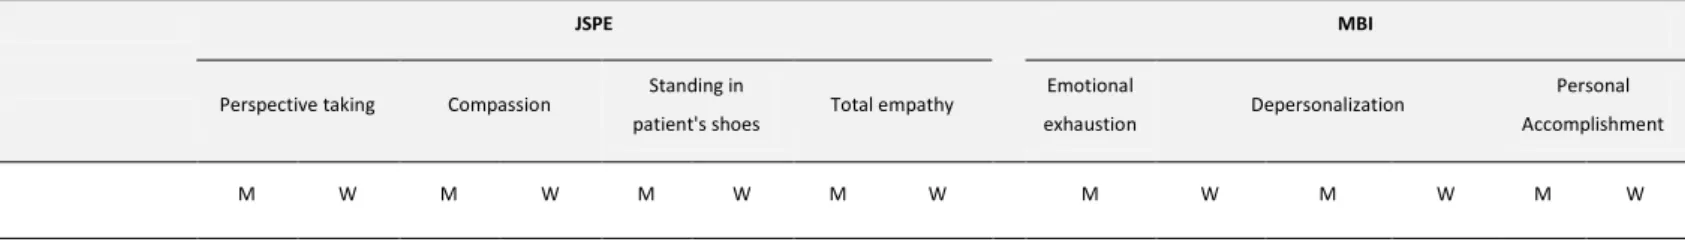 Table VI. – Correlation between the Jefferson Scale of Physician’s Empathy (JSPE) and the Maslach Burnout  Inventory (MBI)